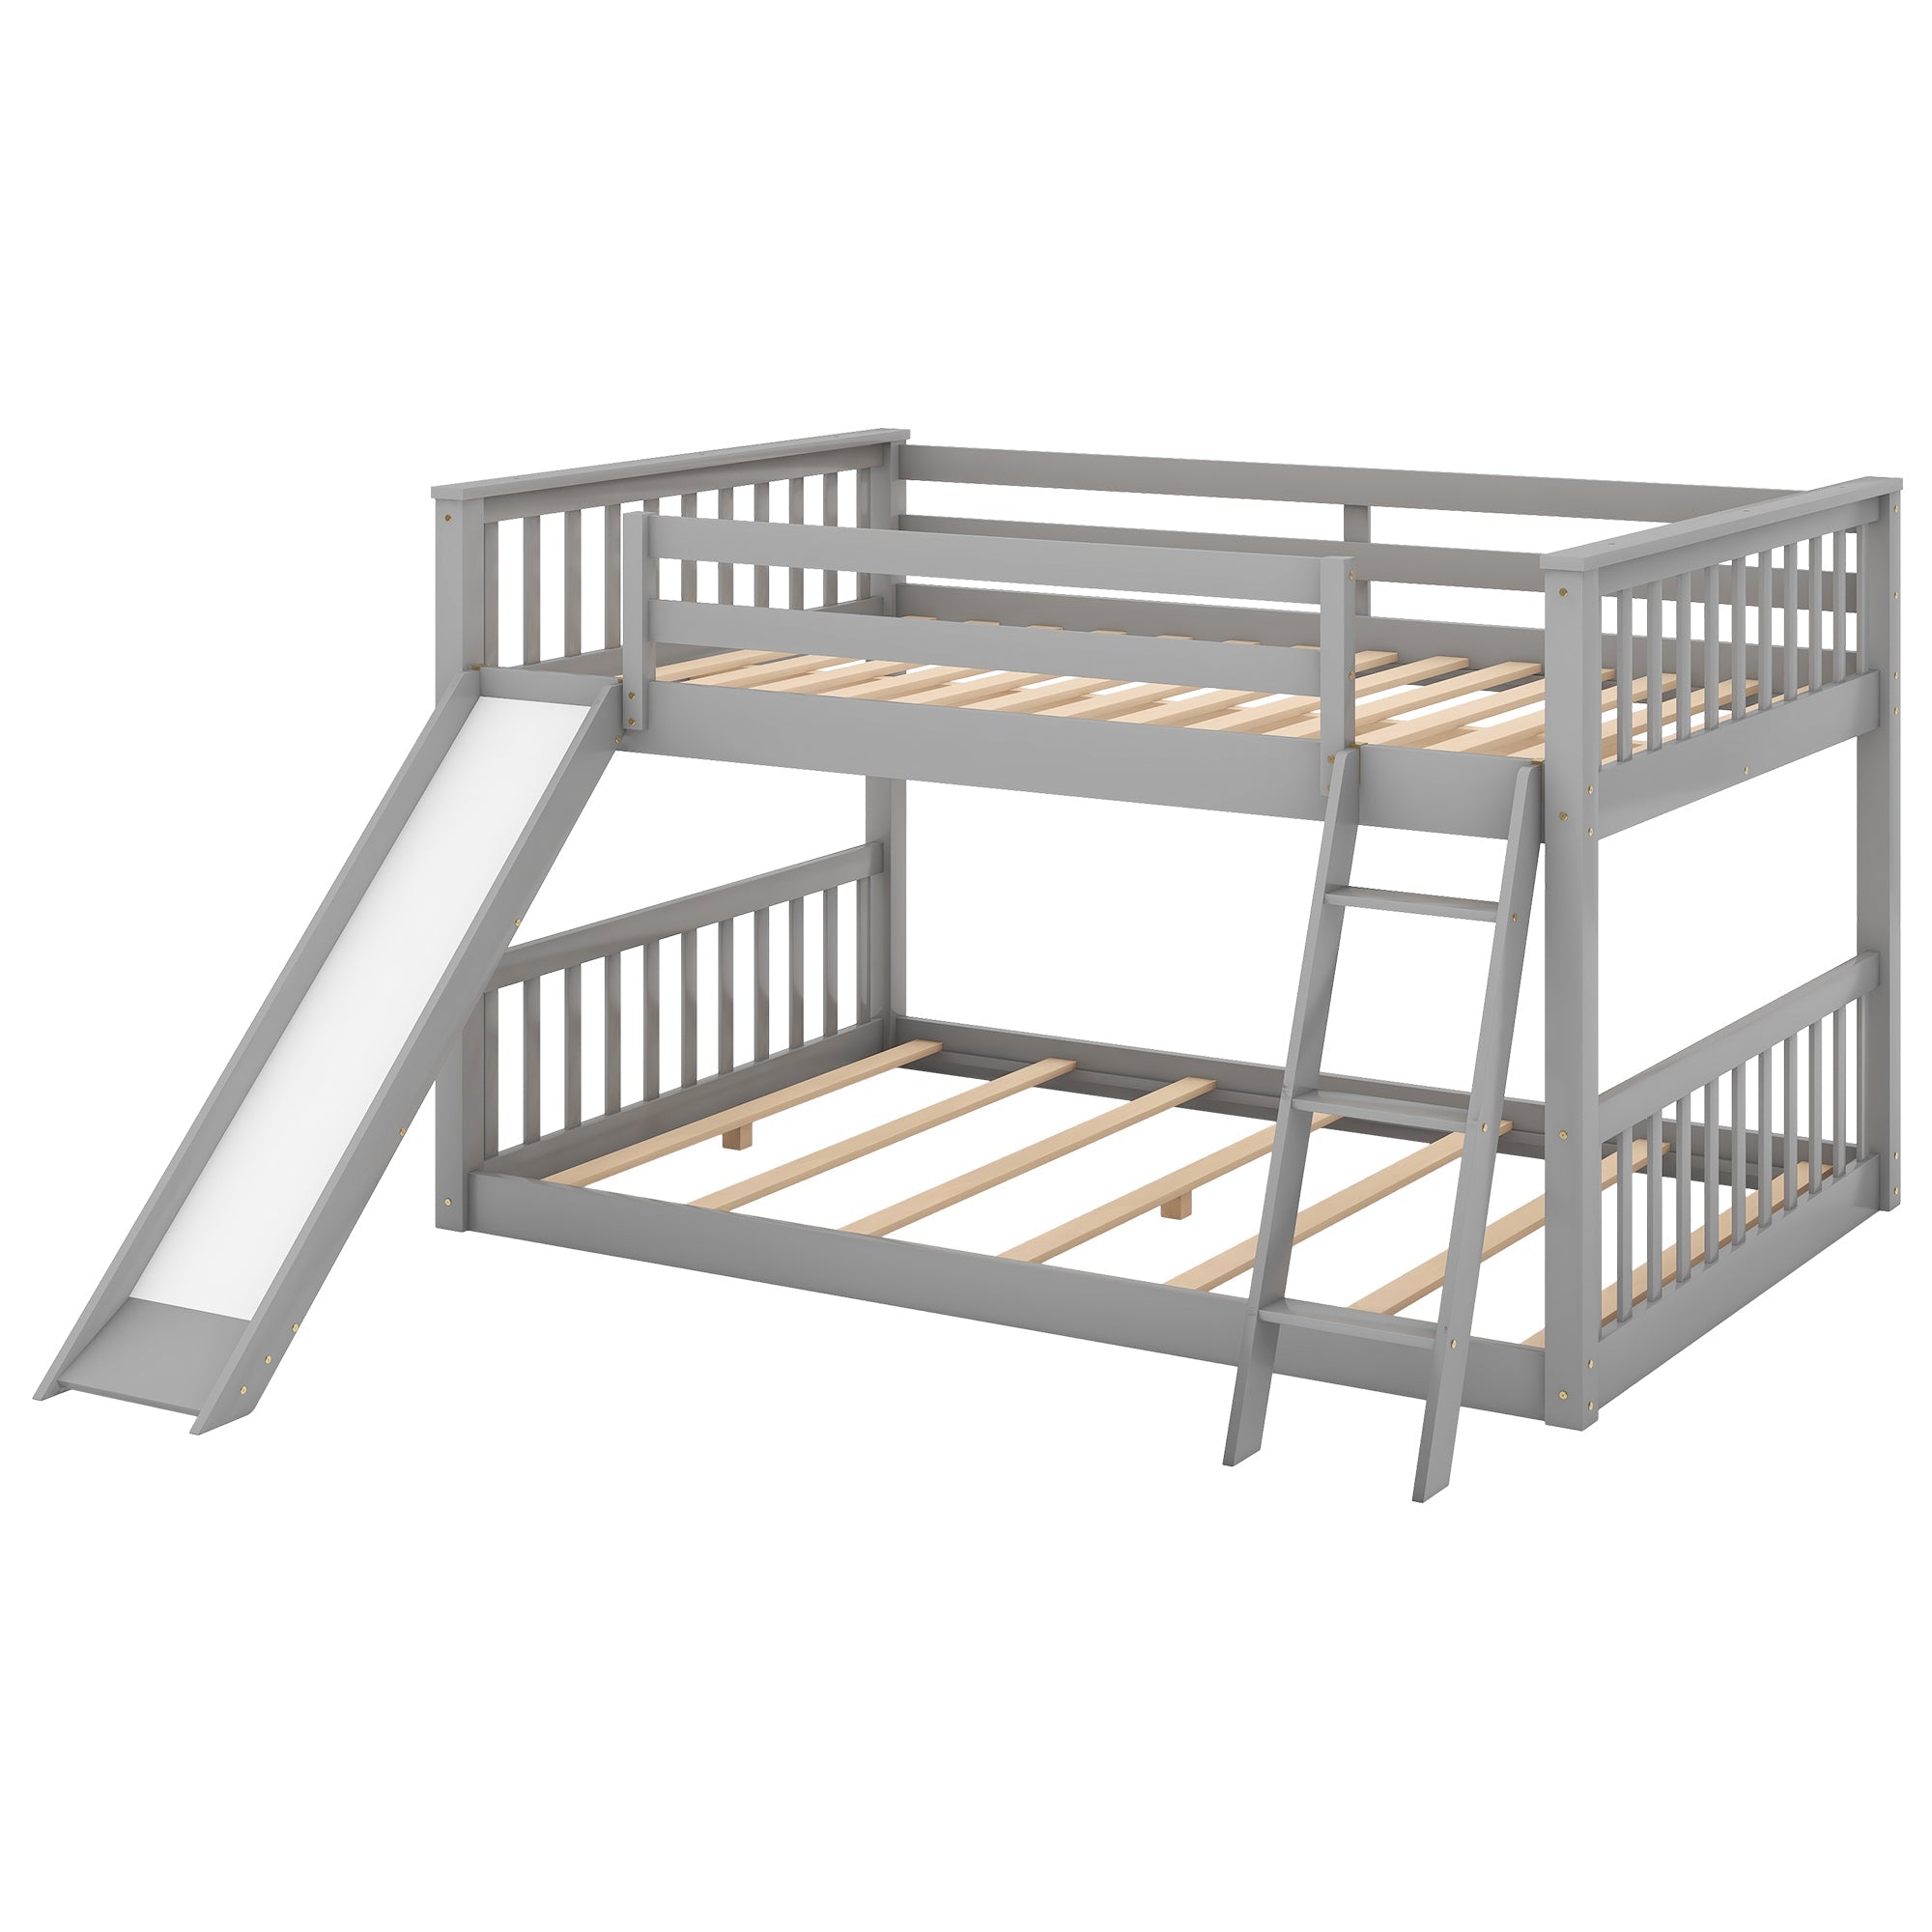 Euroco Full over Full Floor Bunk Bed with Slide and Ladder for Kids Bedroom, Gray